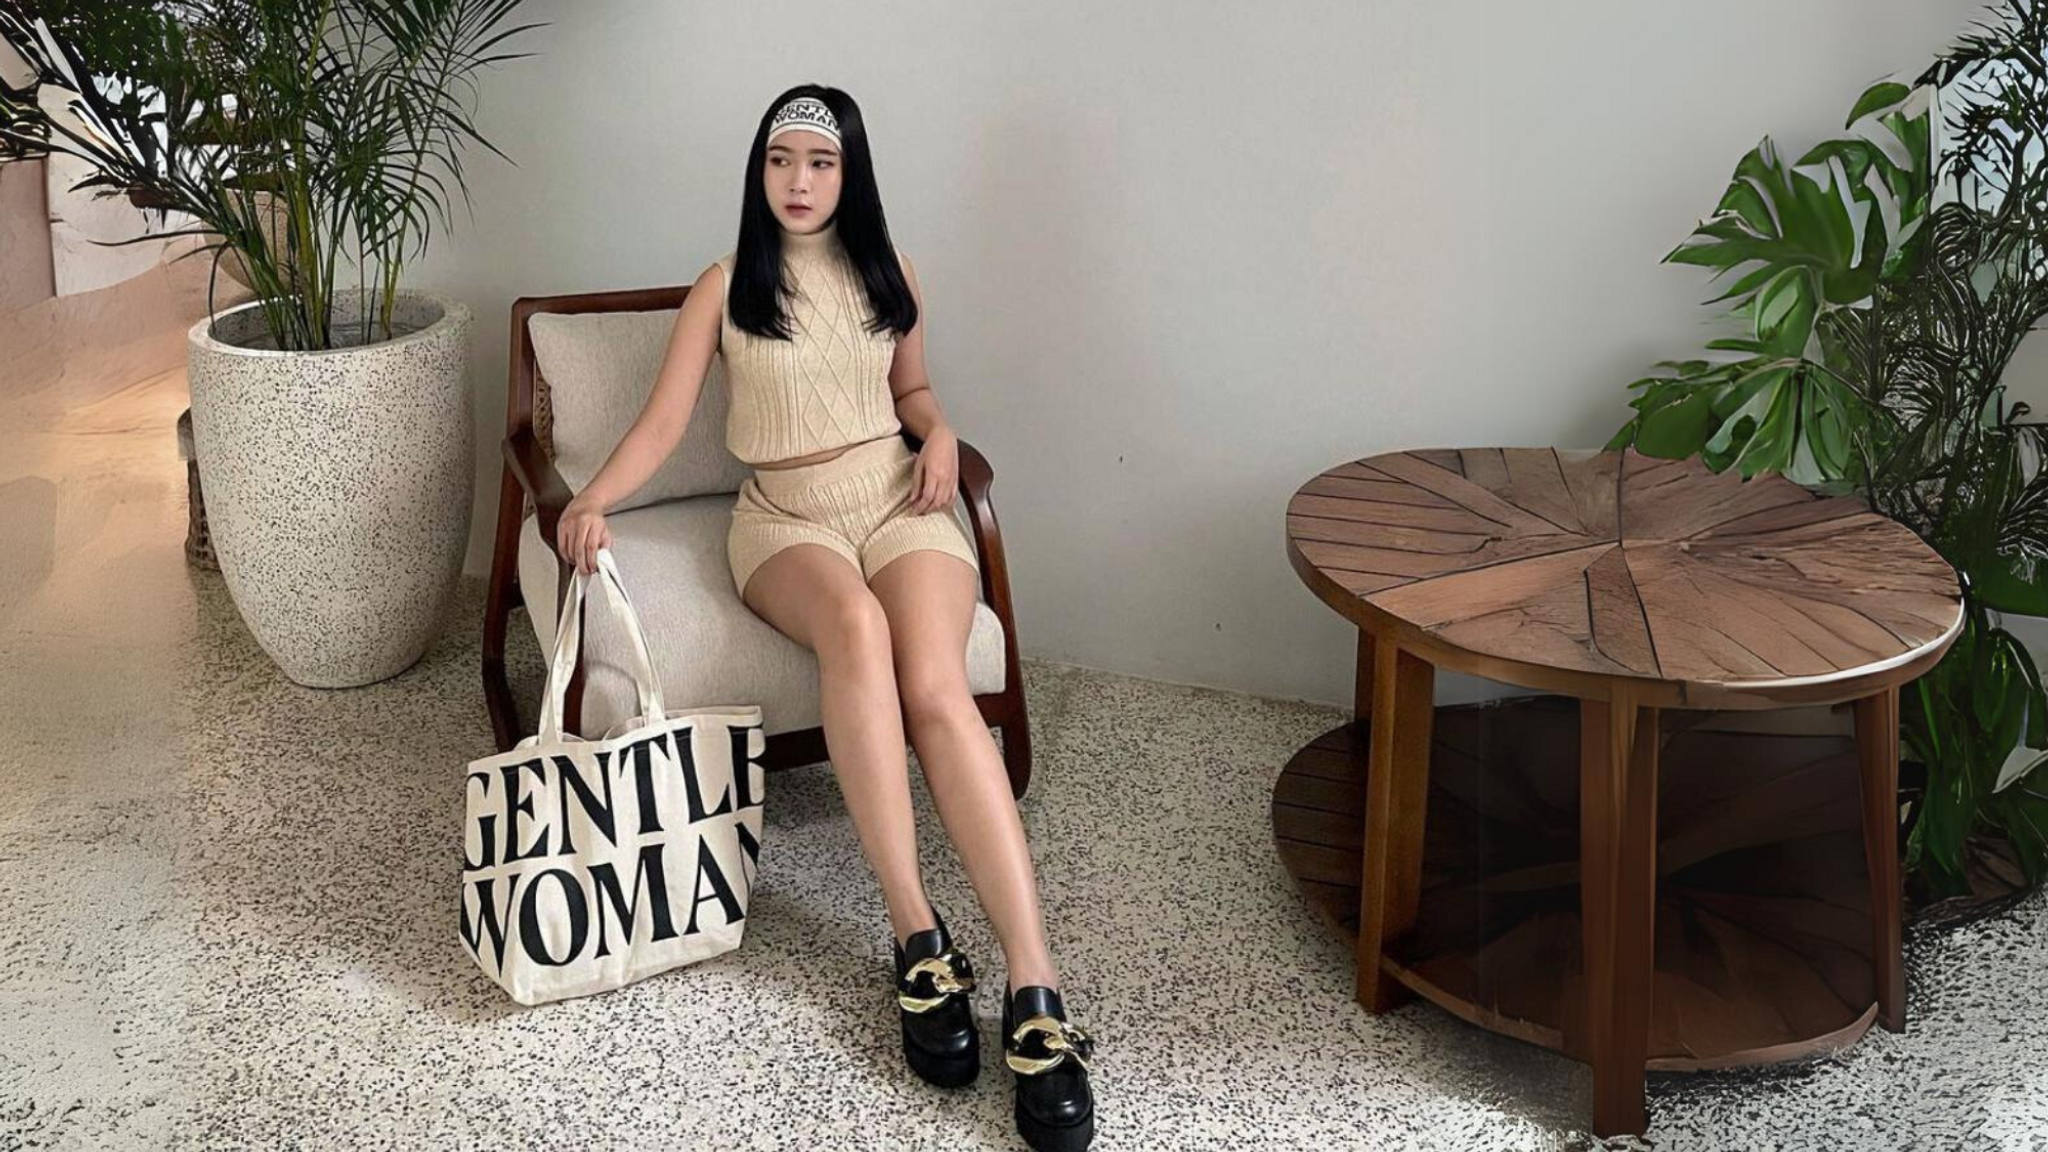 How Gentlewoman brings Thai fashion to Southeast Asians